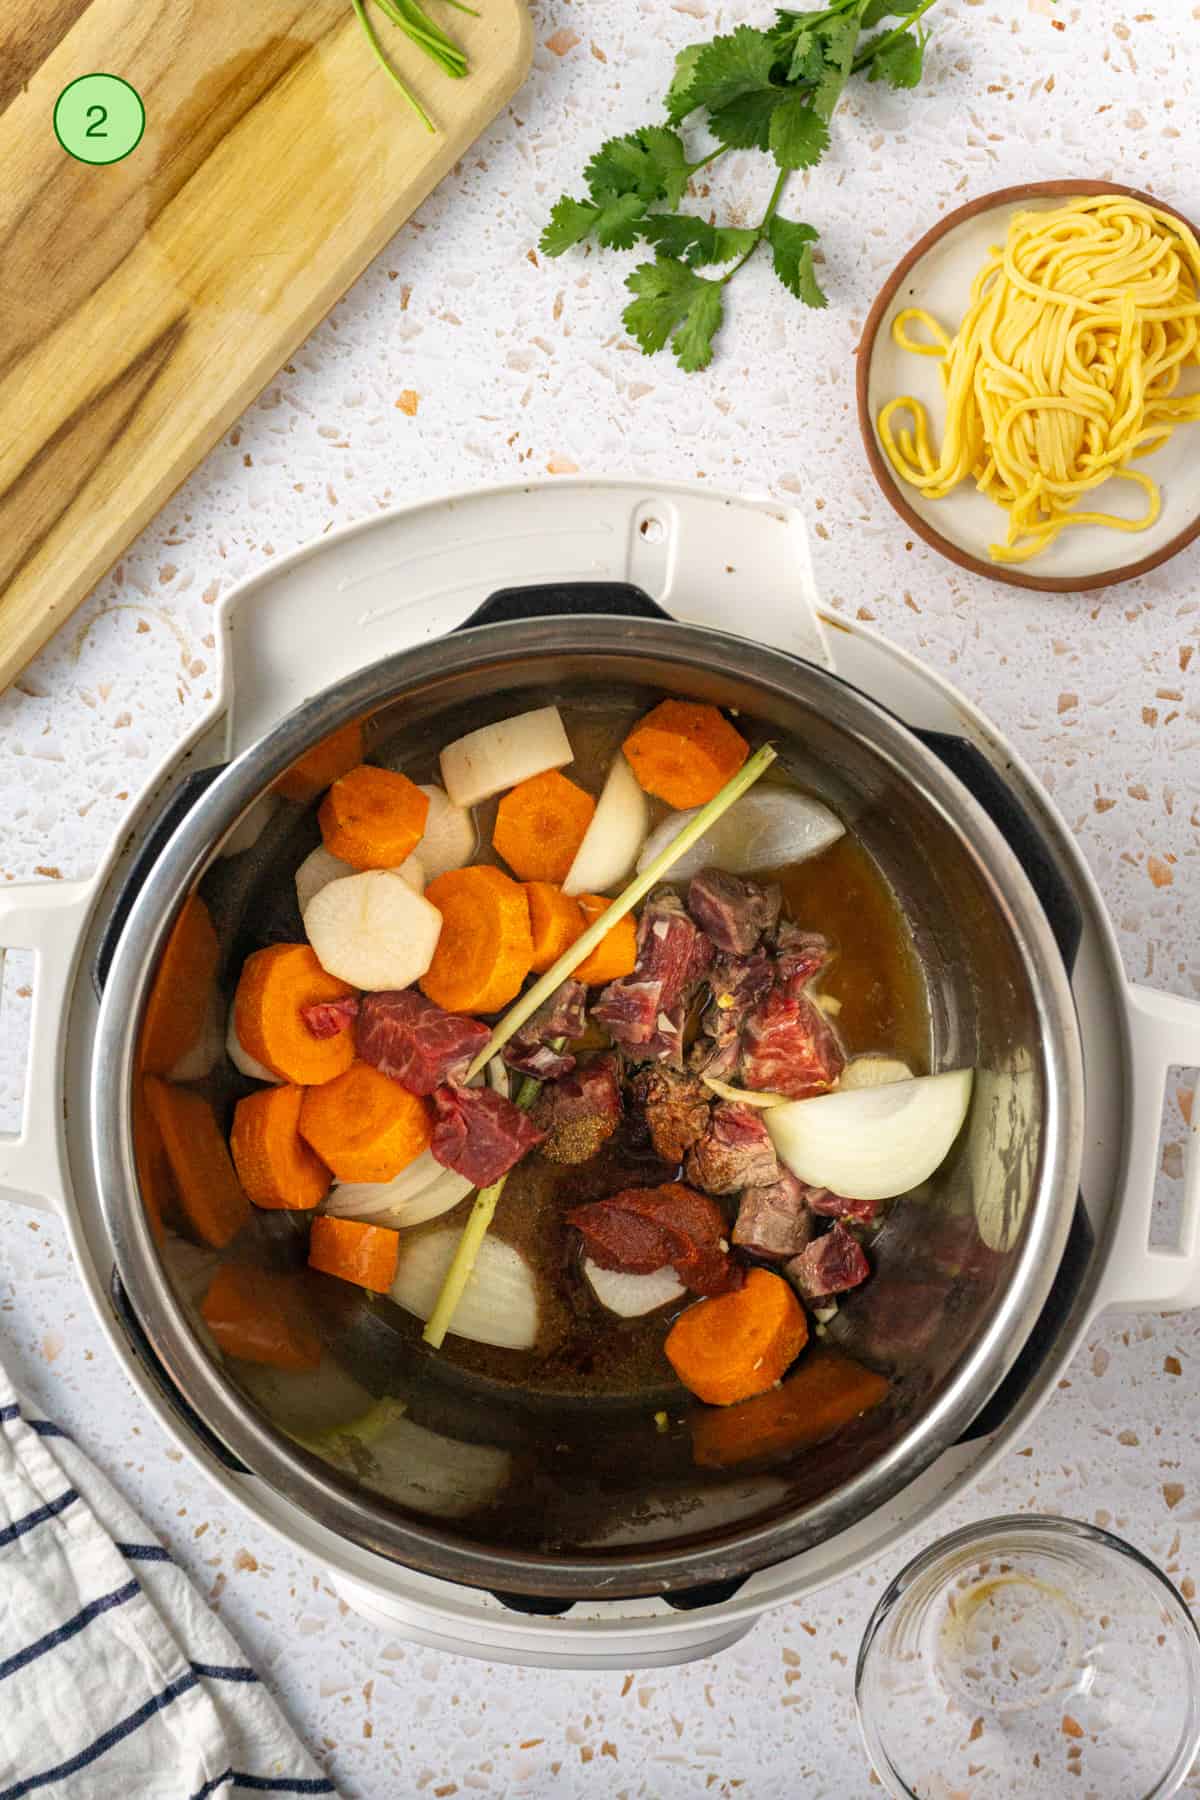 Add the root vegetables and beef in the instant pot to prepare for pressure cooking.